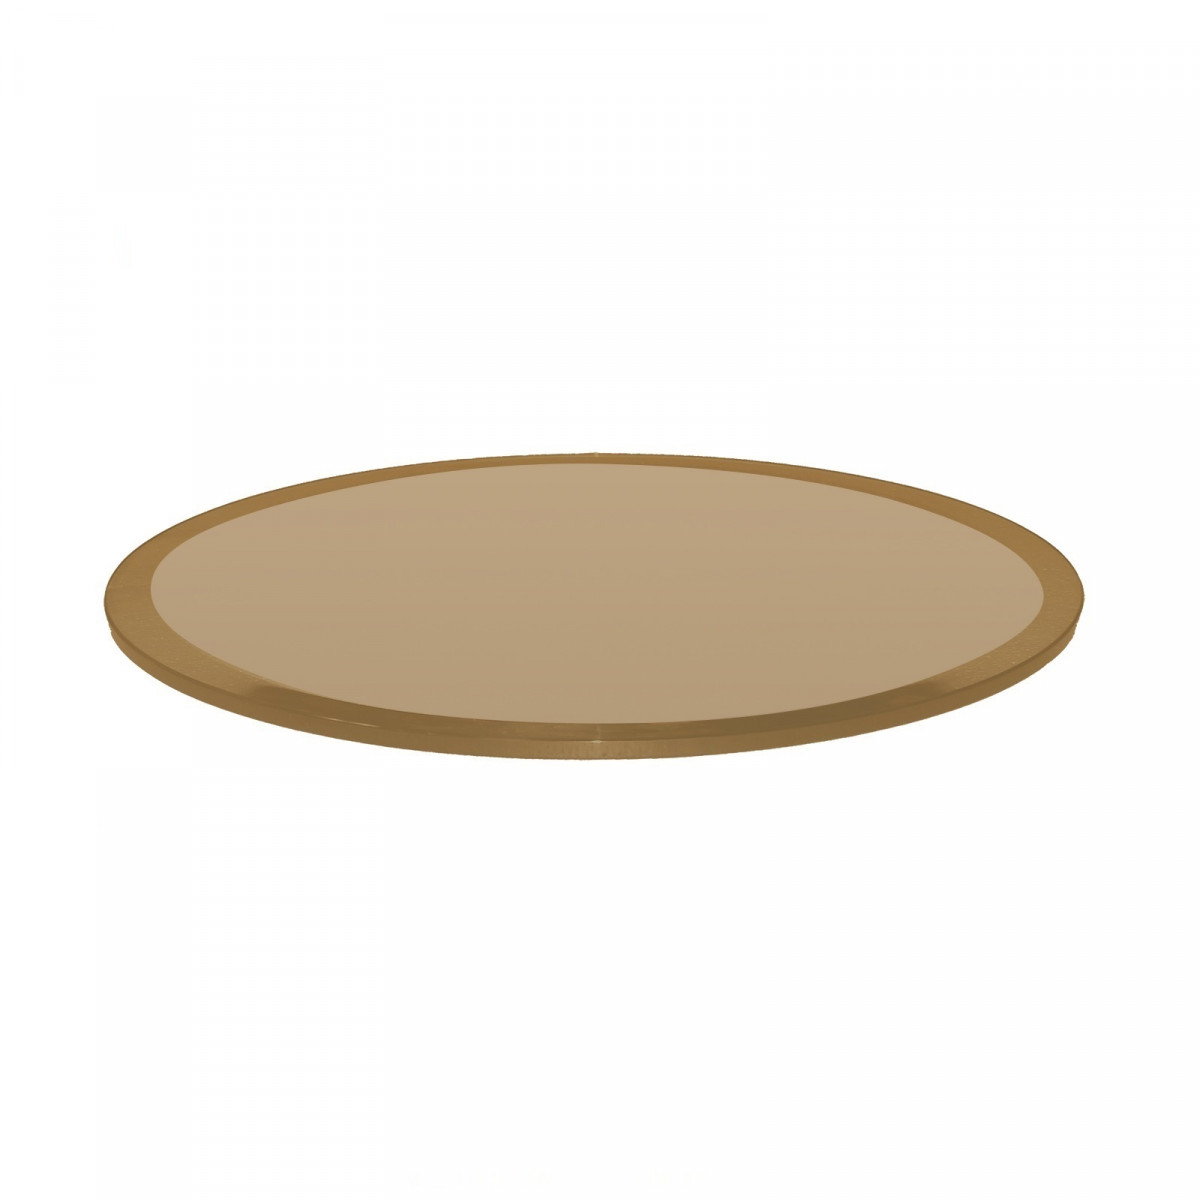 Buy Round Bronze tinted Glass Beveled polished edge - 8 mm thickness Table top glass